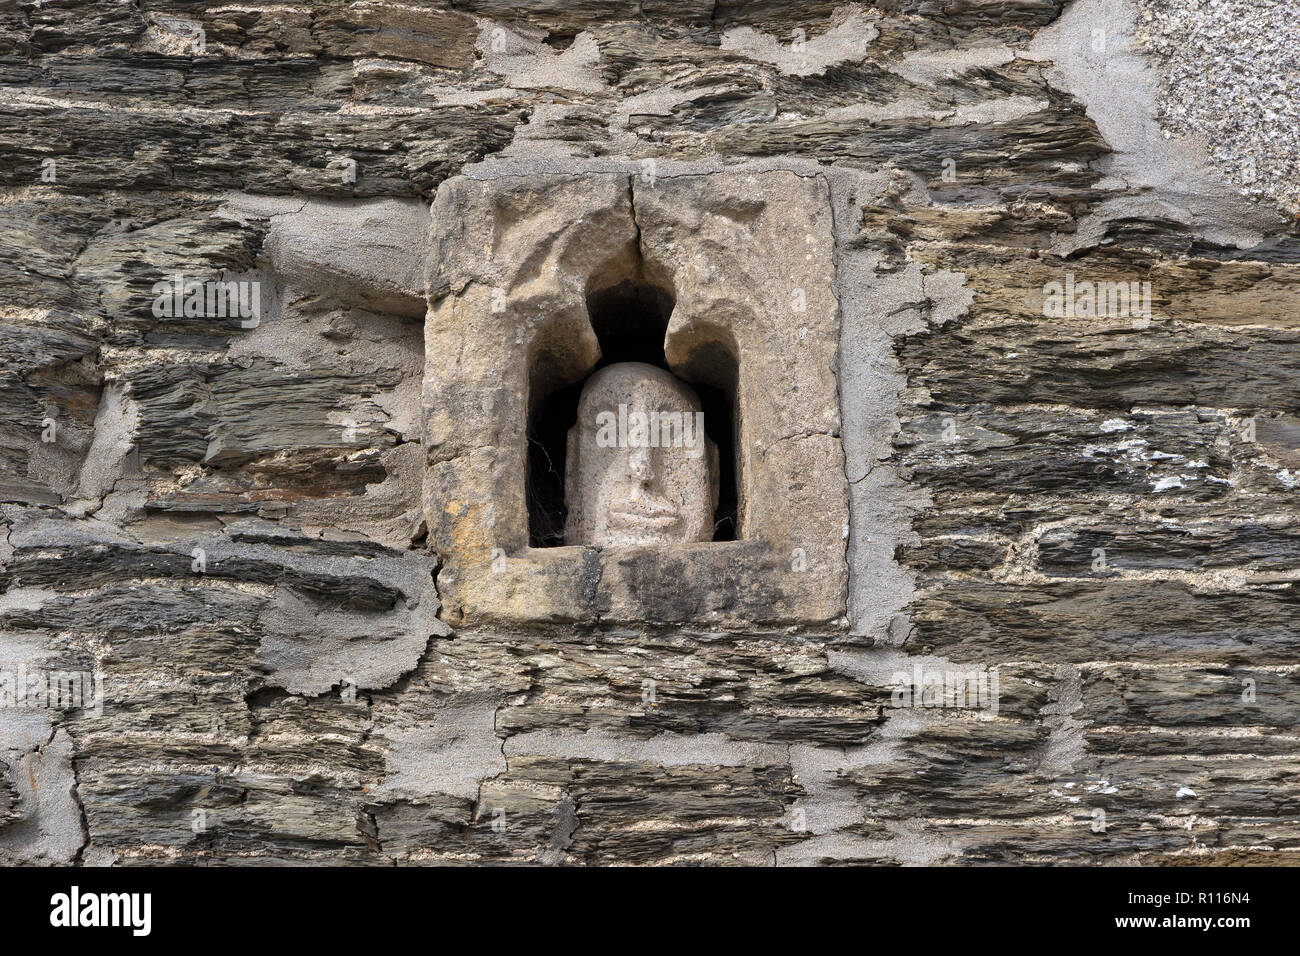 stone face in old wall, Padstow, Cornwall, England, Great Britain Stock Photo